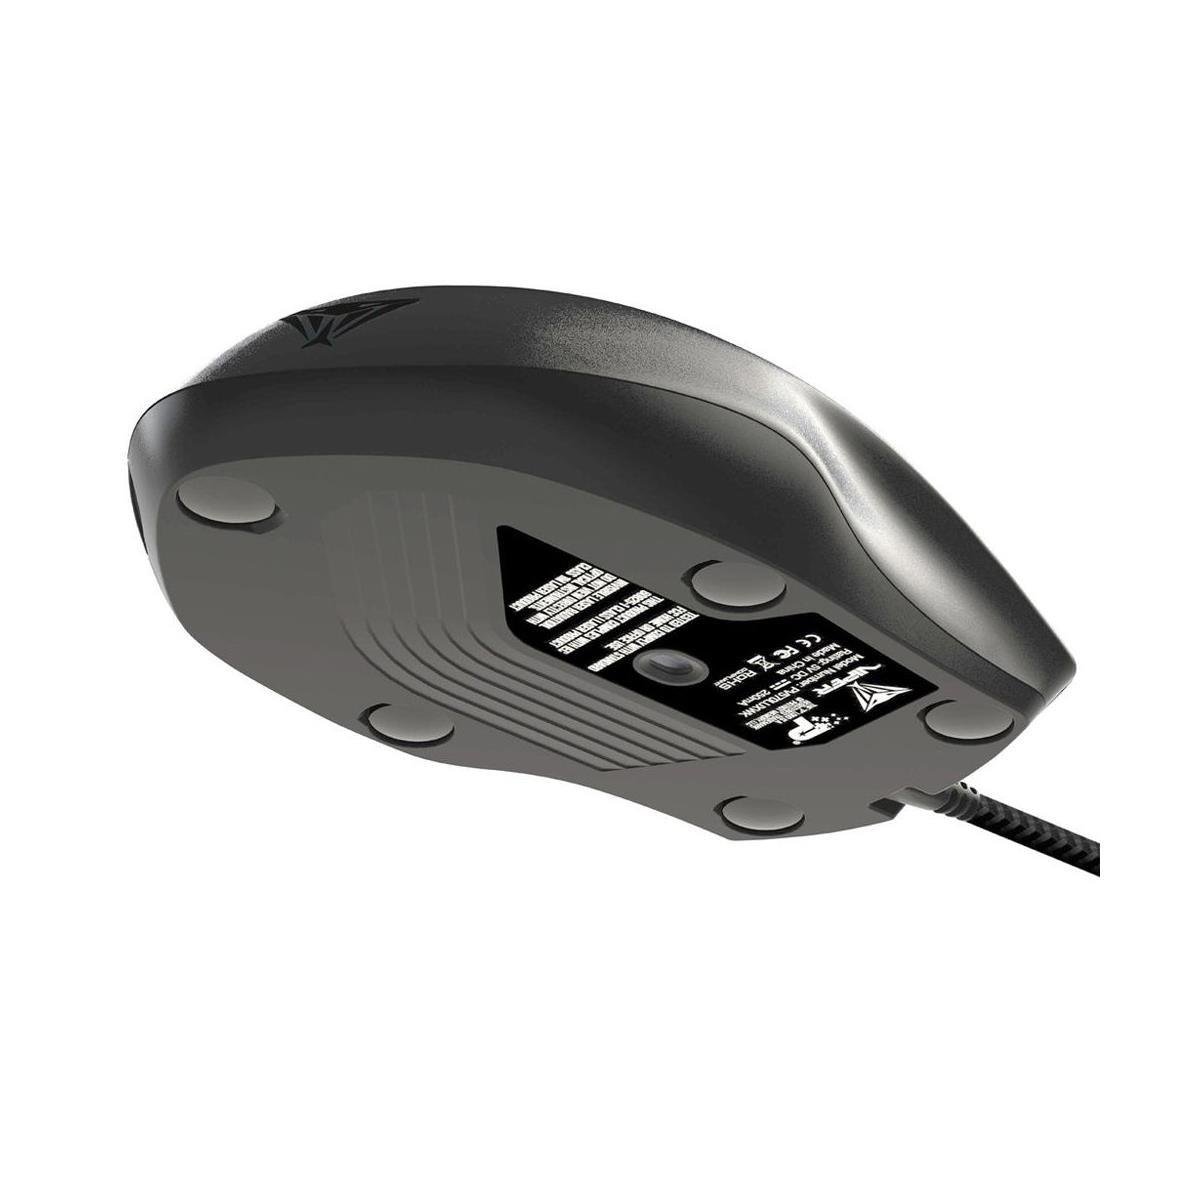 Patriot Viper V570 Blackout Edition RGB Laser Gaming Mouse - Wired